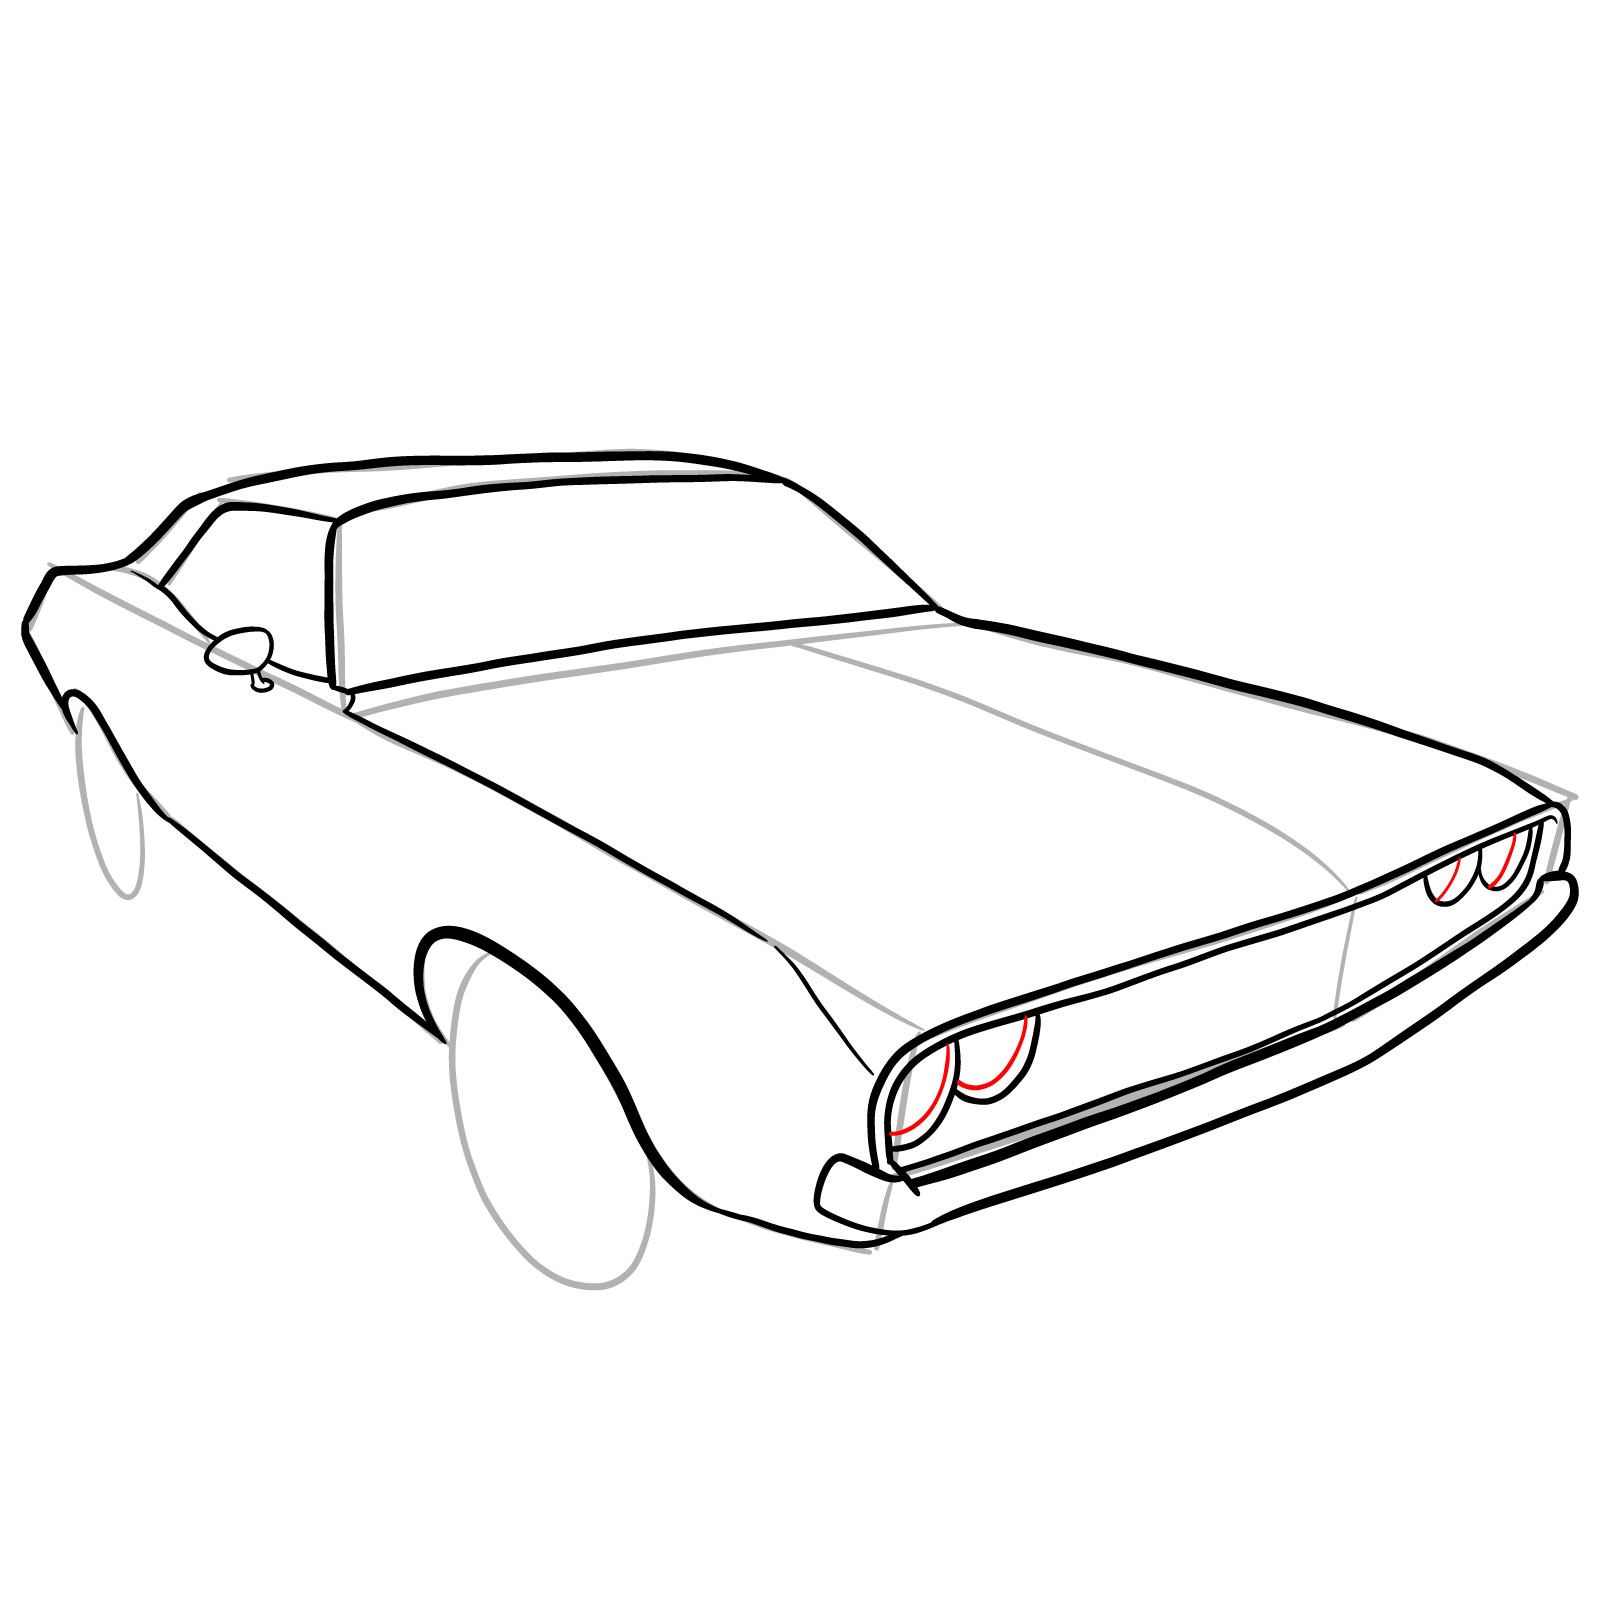 How to draw Dodge Challenger 1970 - step 20